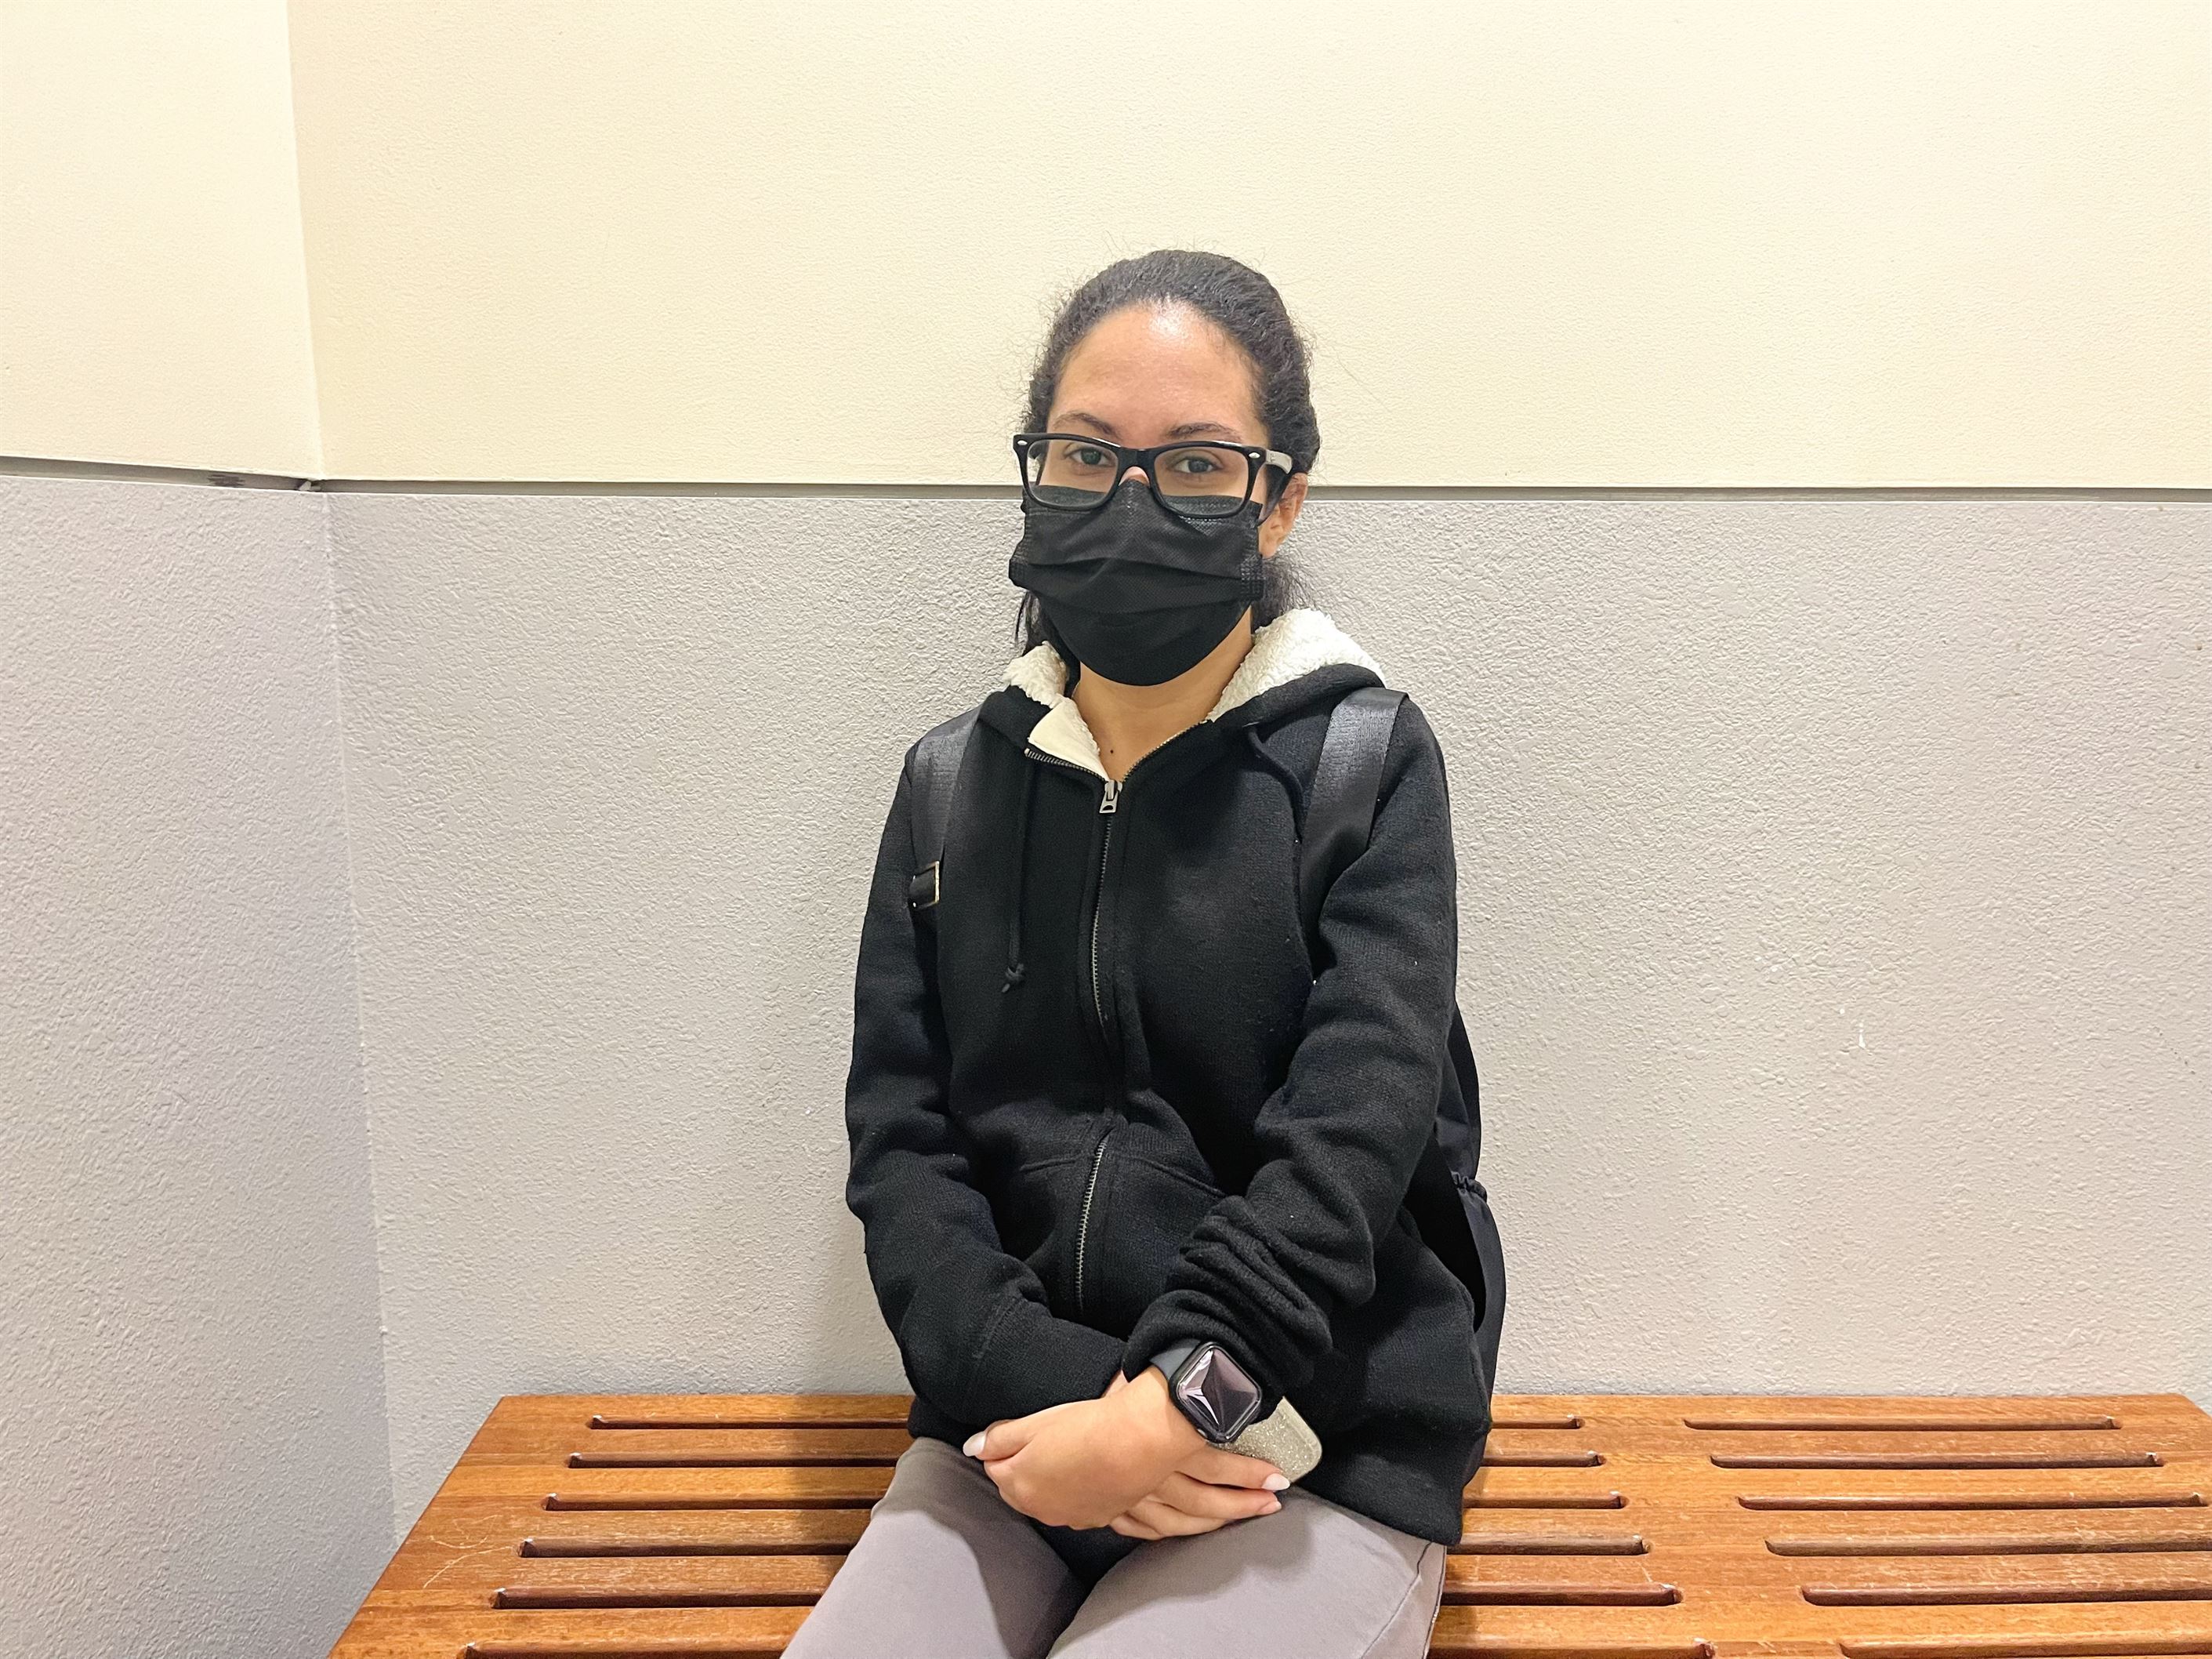 Nathalie Cuello, a junior psychology major, says the university should consider cancelling classes rather than operating remotely. Jennifer Portorreal | The Montclarion